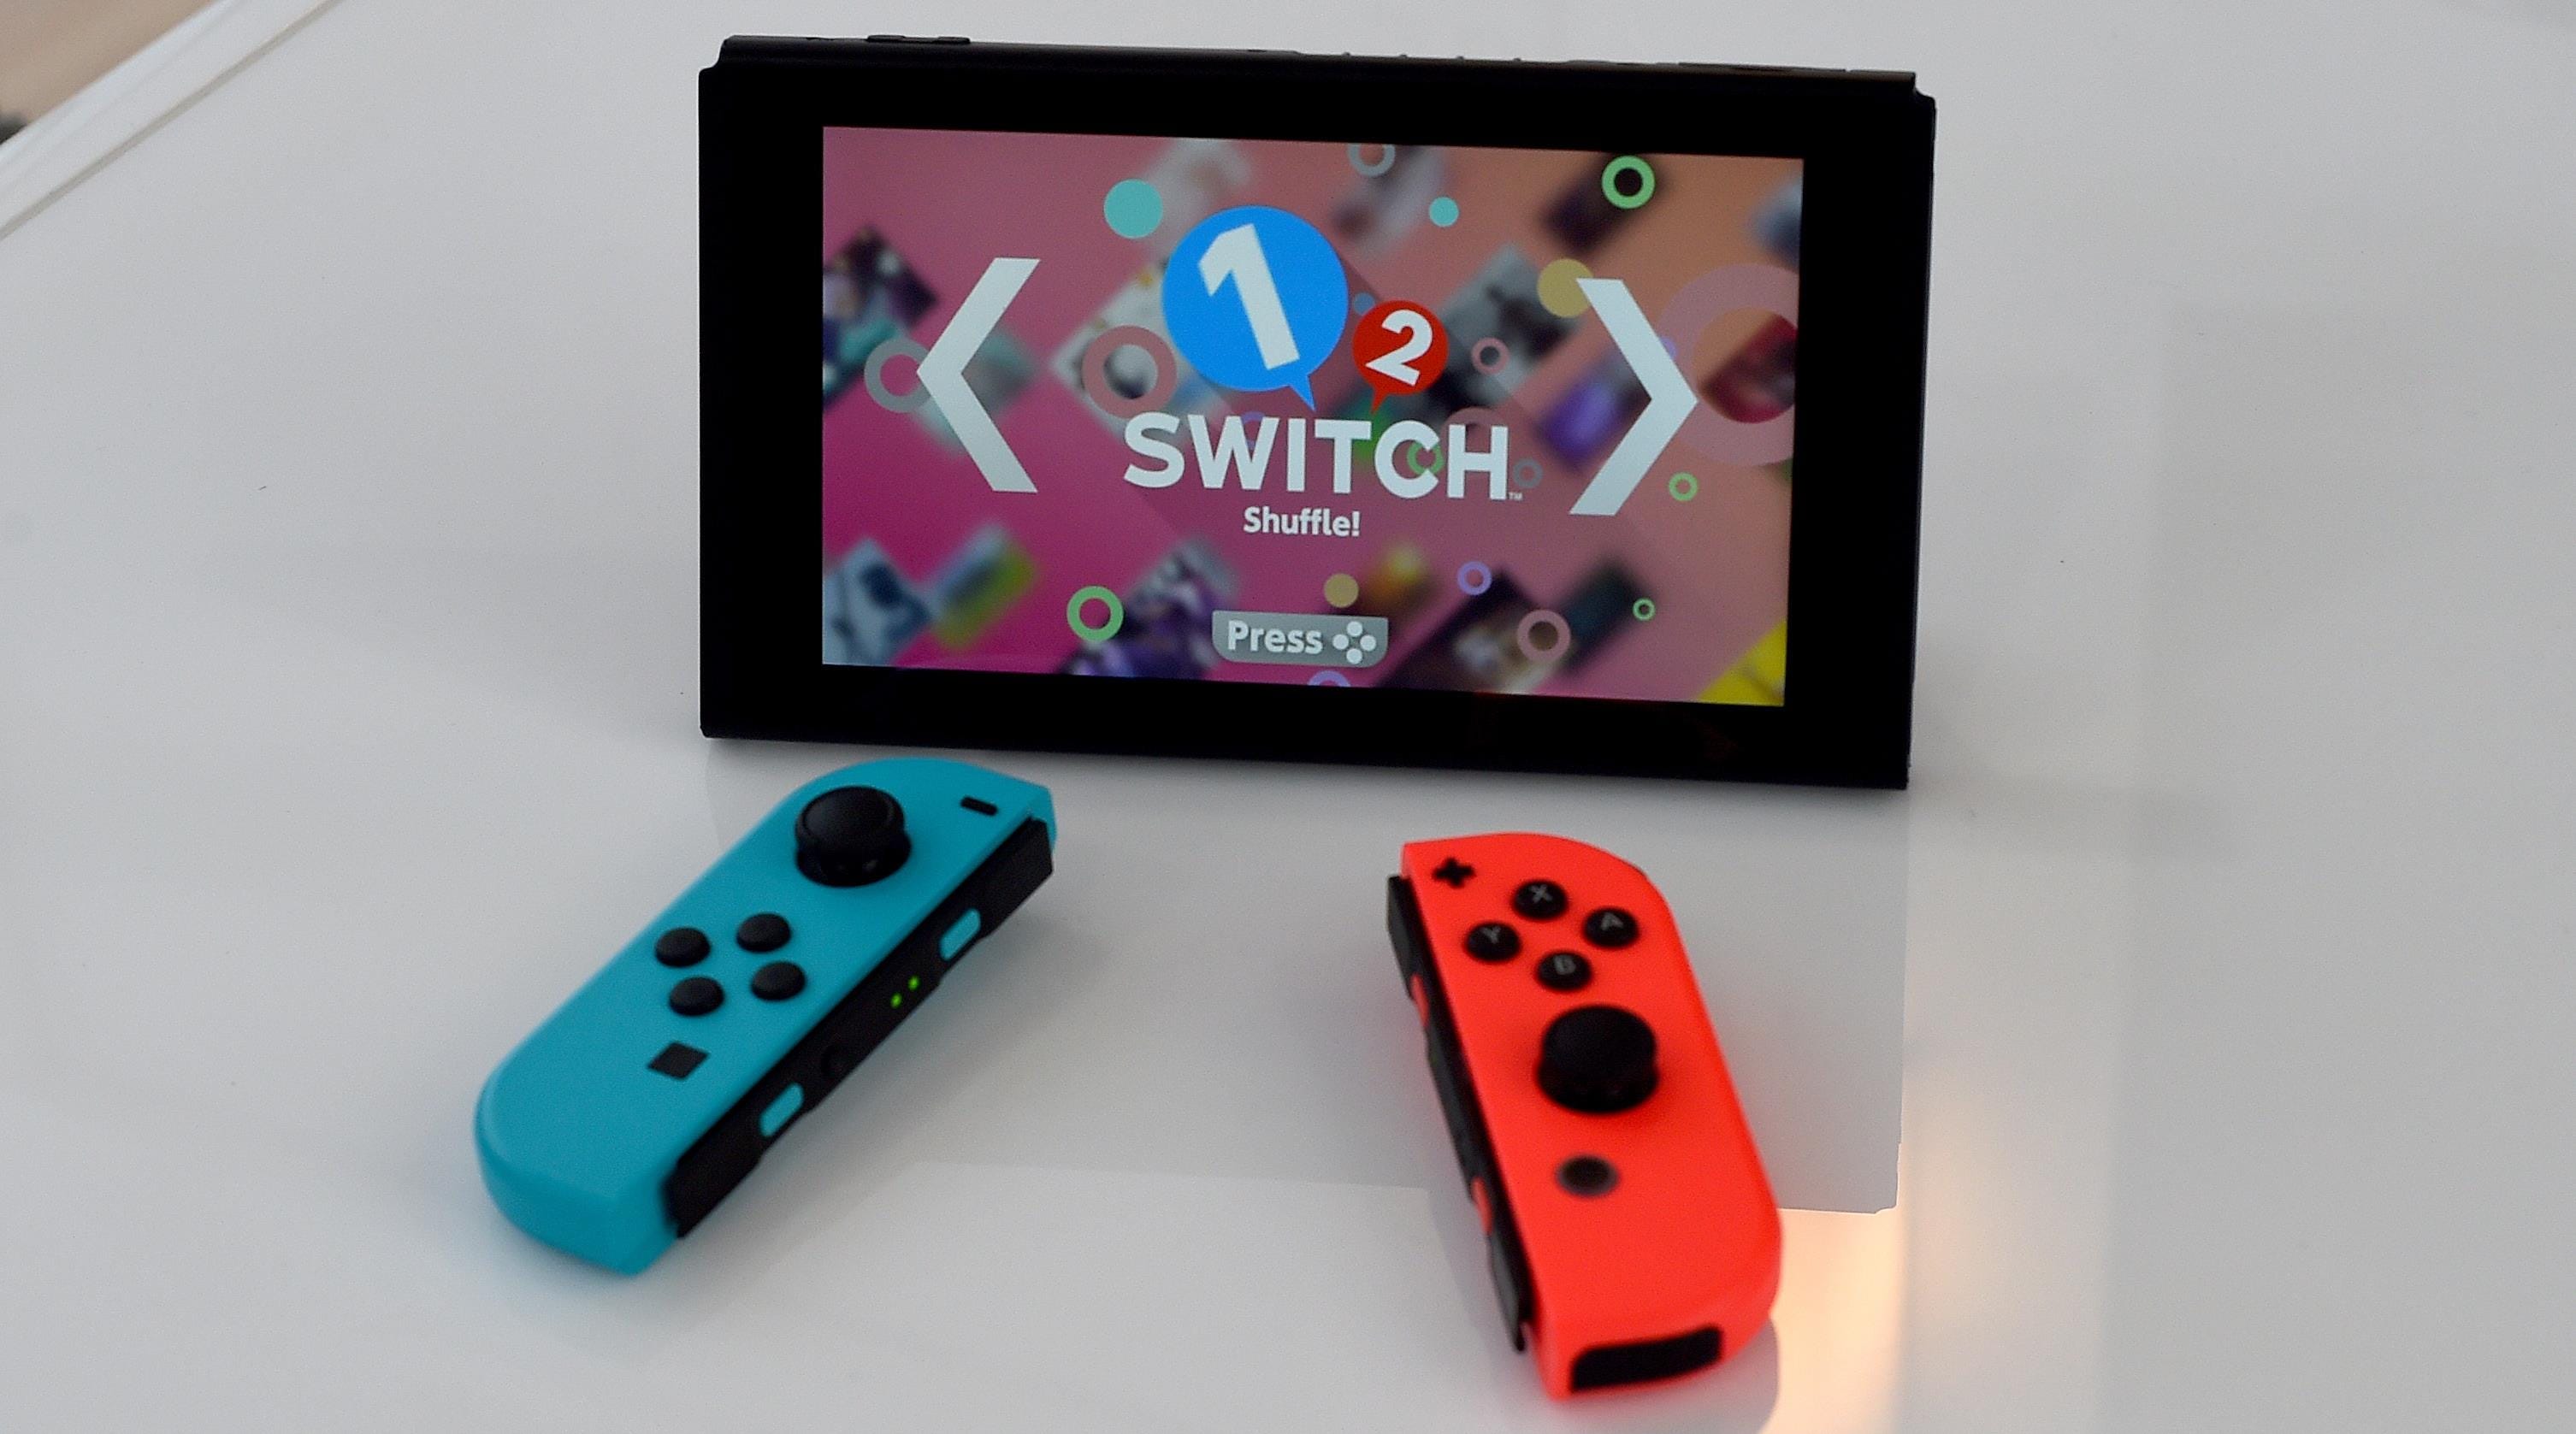 prime day nintendo switch deals